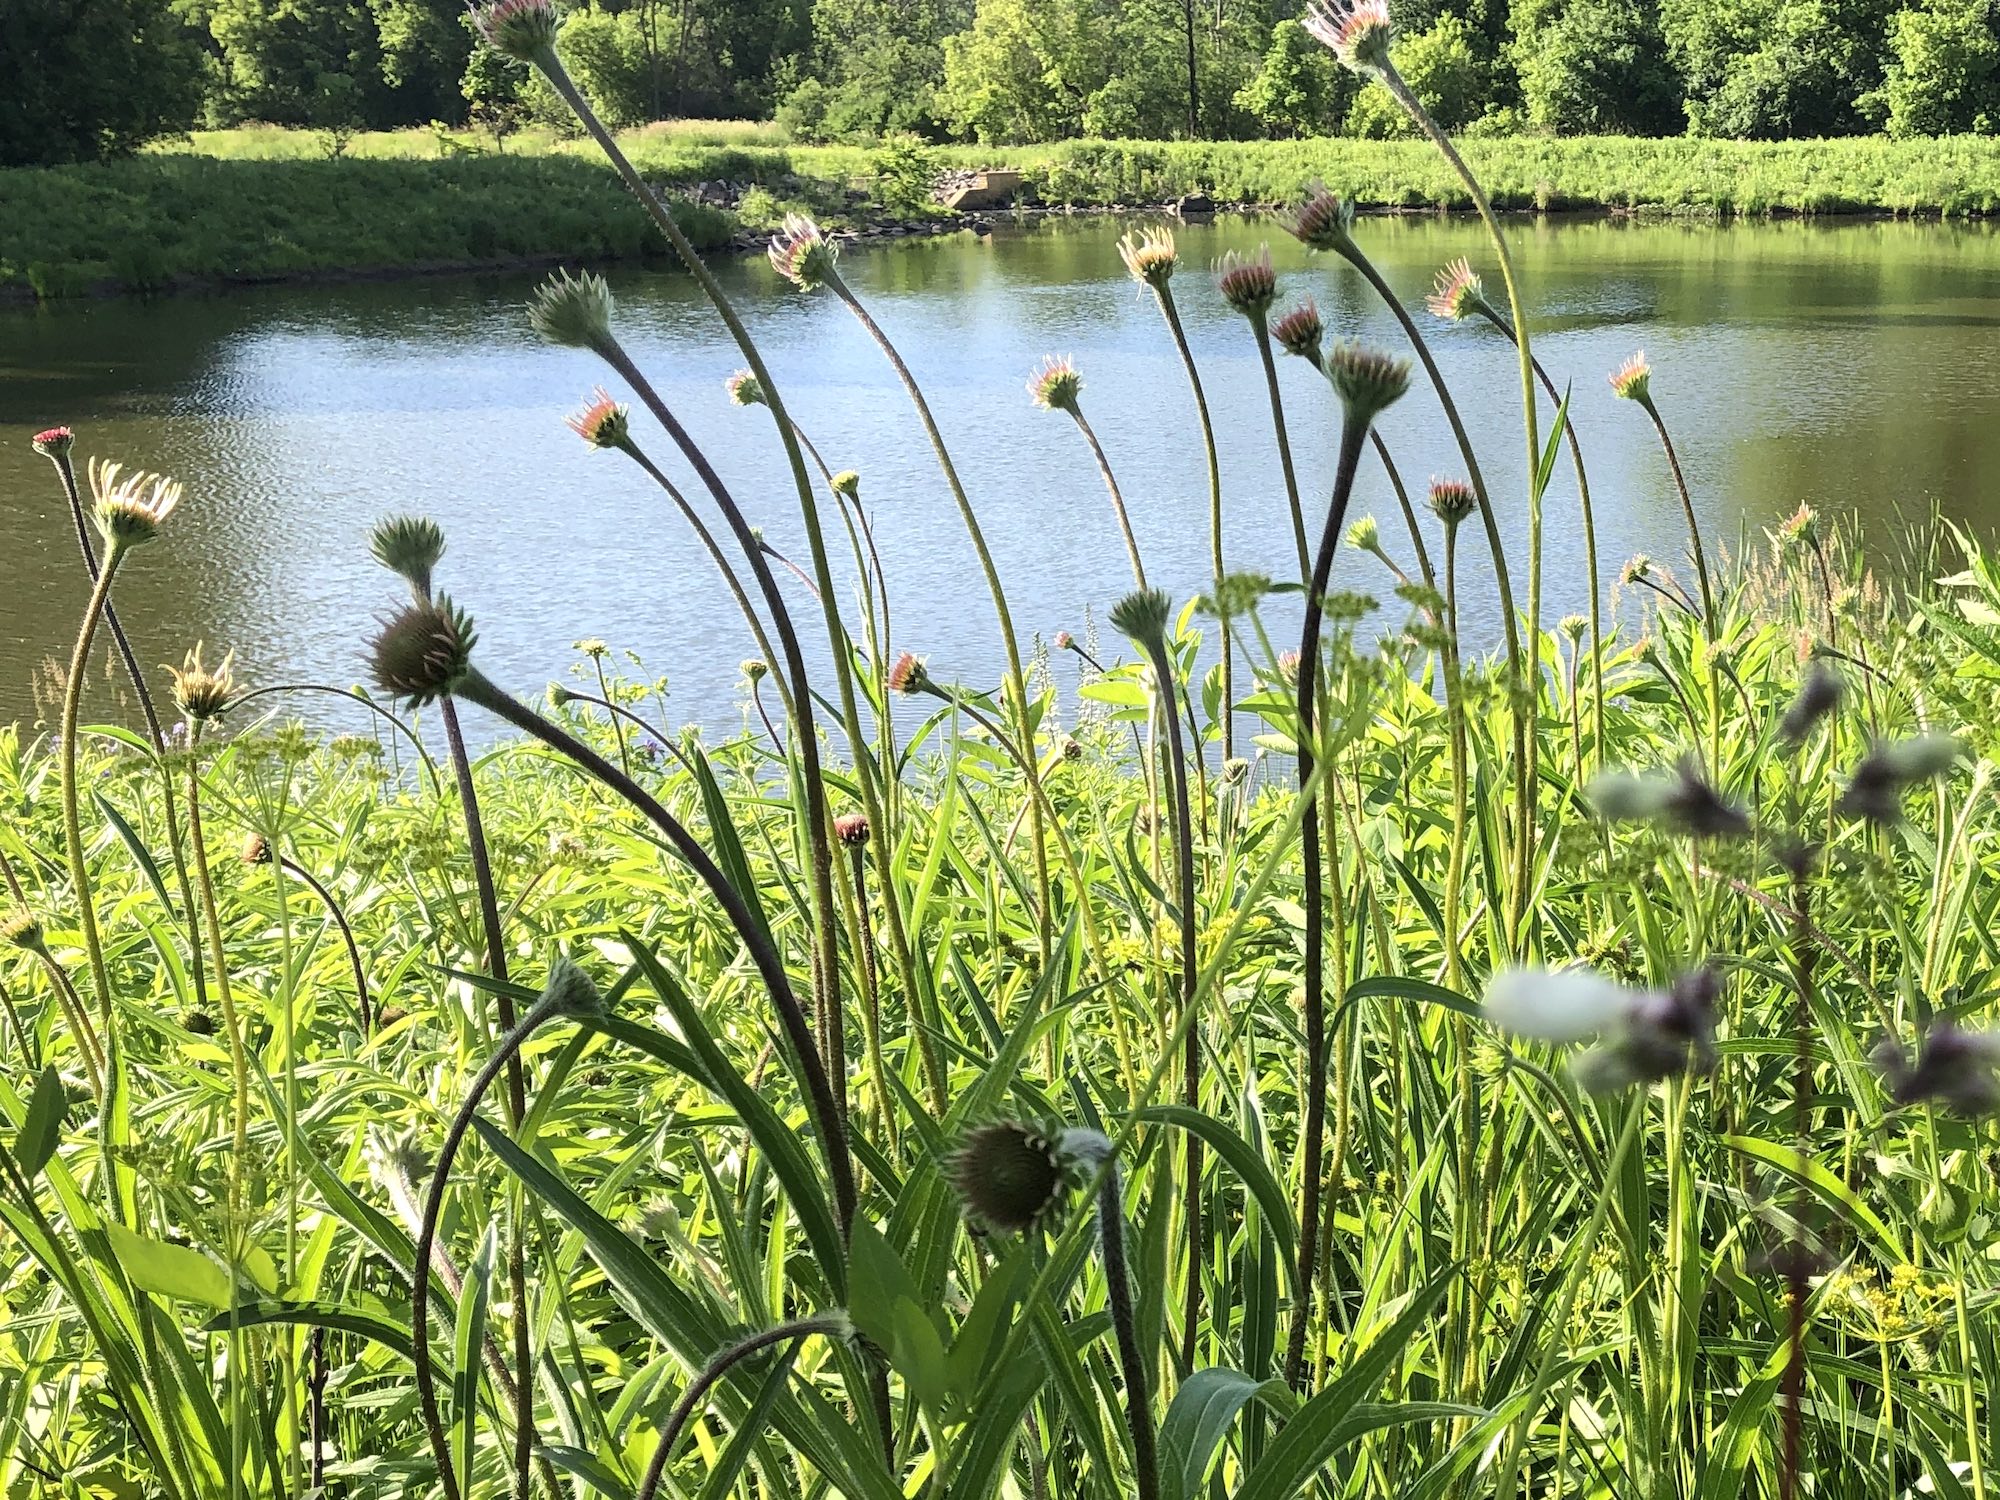 Pale purple coneflower on bank of Retaining Pond on corner of Nakoma Road and Manitou Way on June 11, 2019.